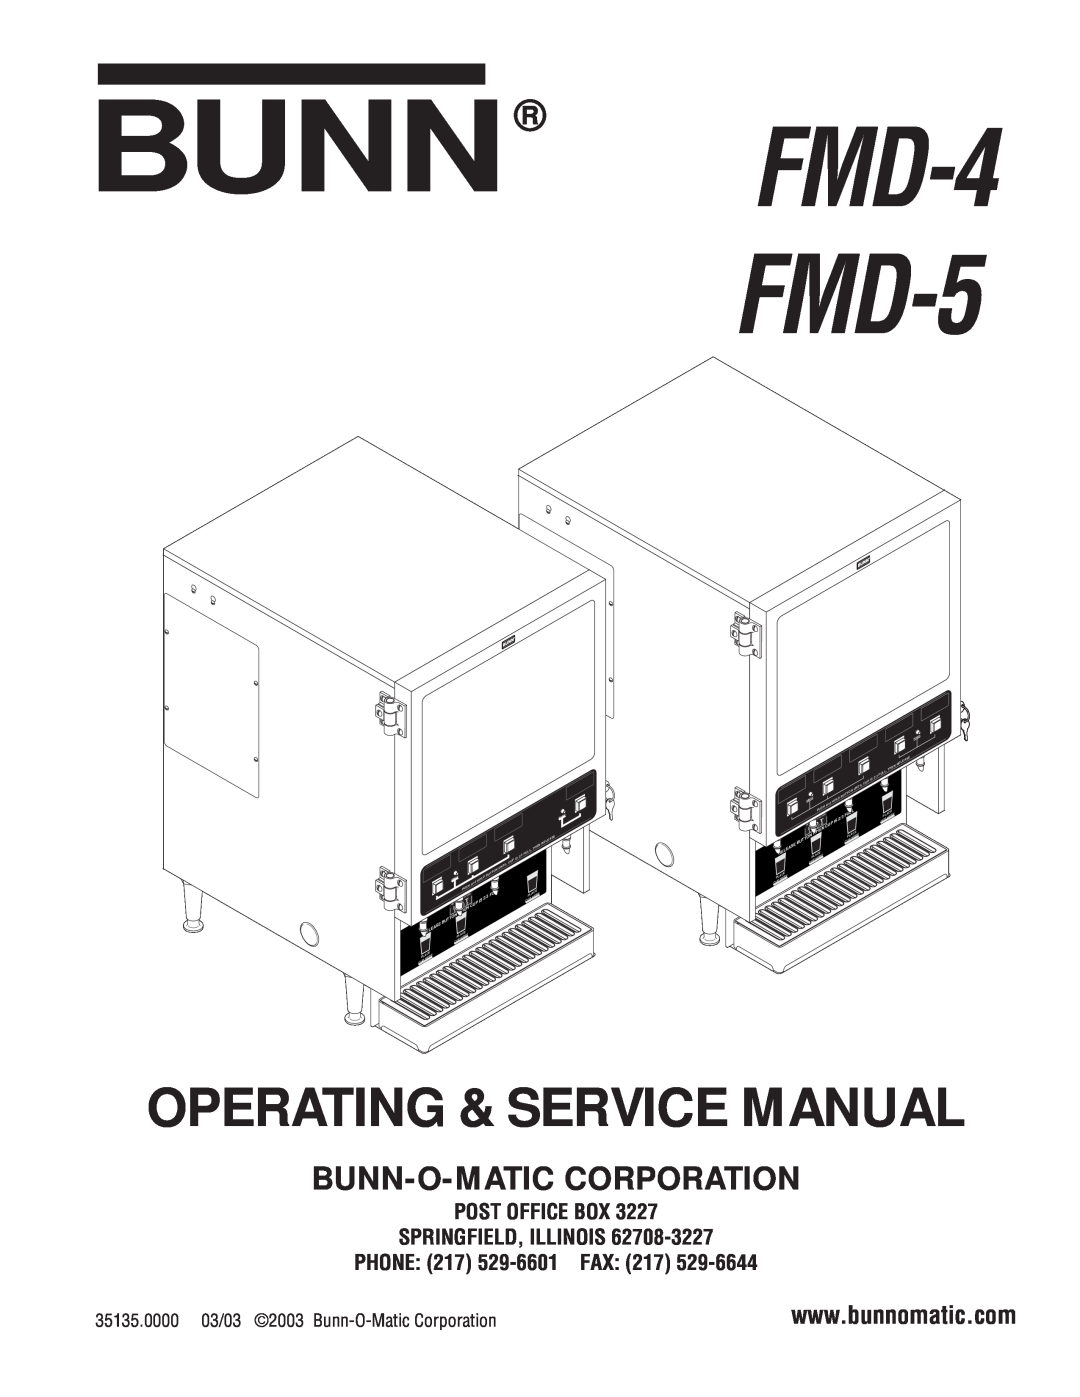 Bunn specifications are subject to change without notice, Post Office Box Springfield, Illinois, FMD-4 FMD-5 